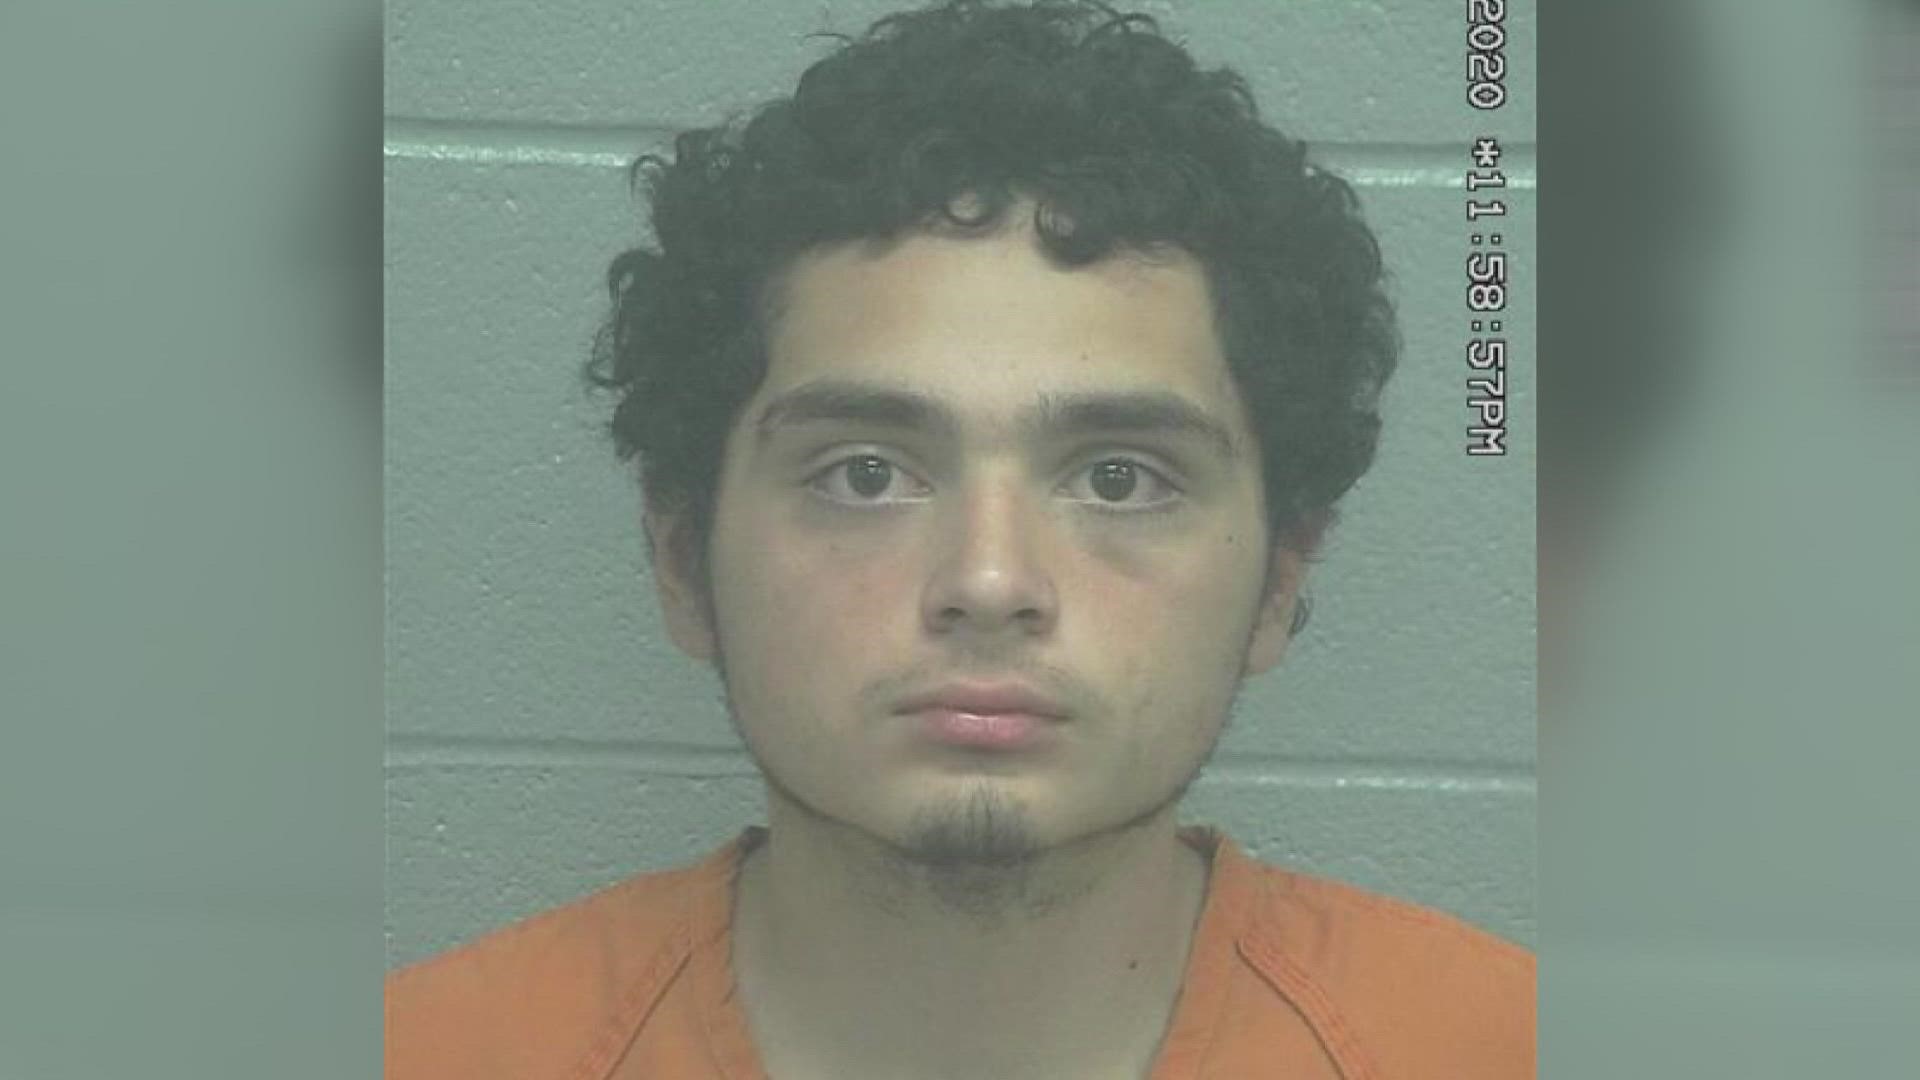 Jose Gomez III stabbed several people, including two children and a Sam's Club employee in March of 2020.